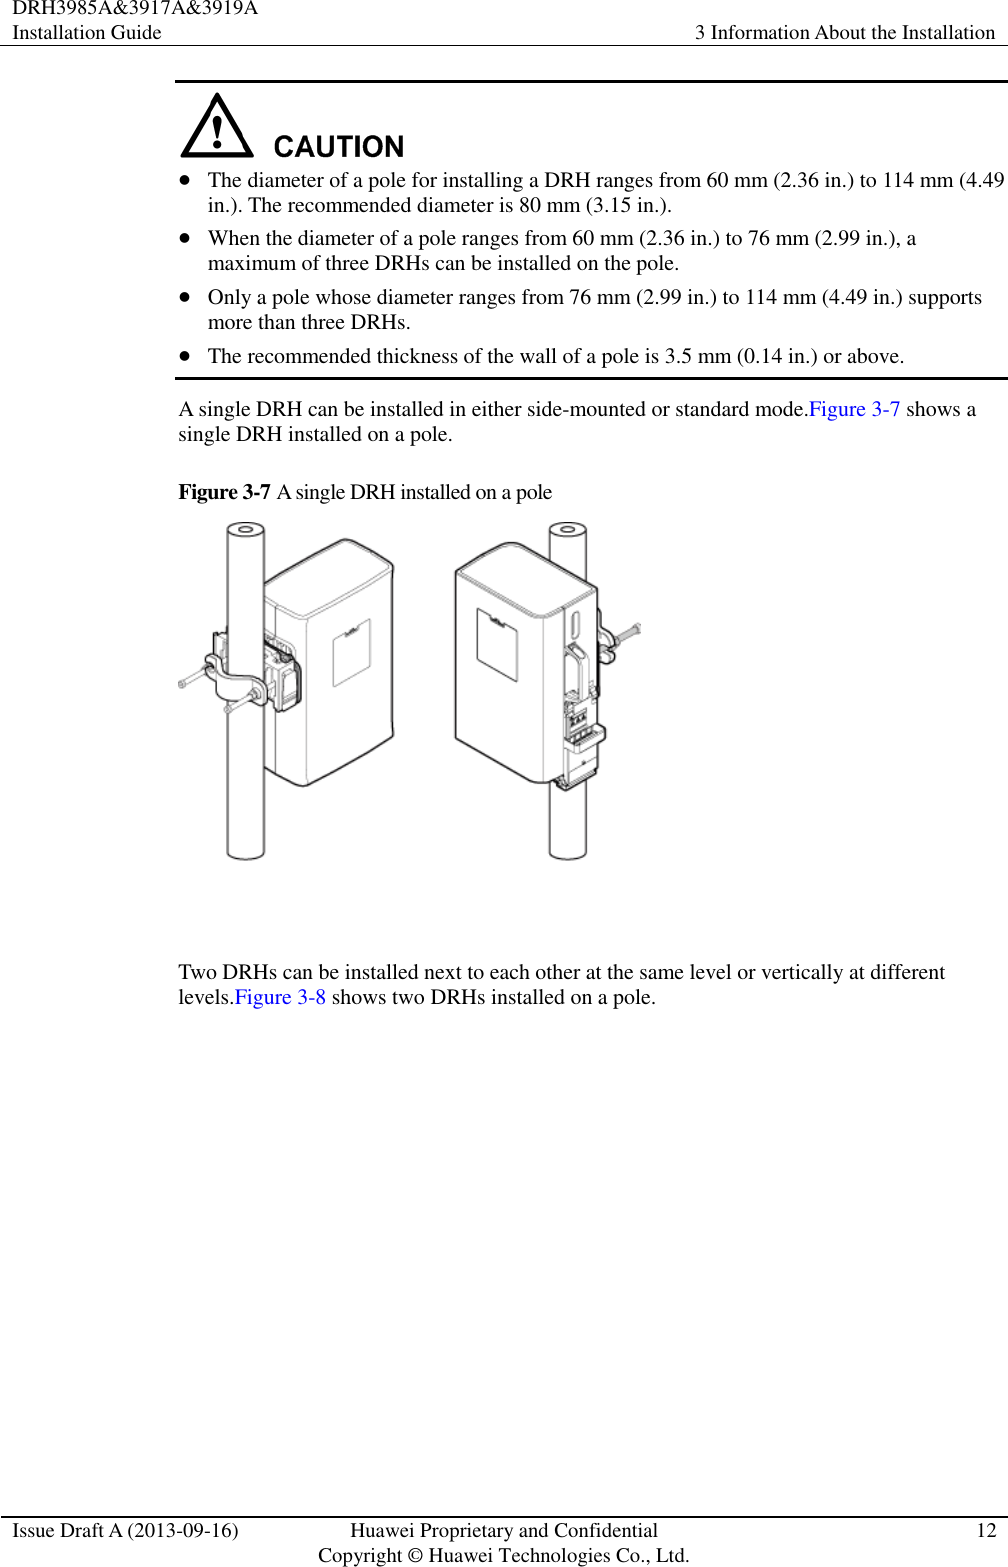 DRH3985A&amp;3917A&amp;3919A Installation Guide 3 Information About the Installation  Issue Draft A (2013-09-16) Huawei Proprietary and Confidential                                     Copyright © Huawei Technologies Co., Ltd. 12    The diameter of a pole for installing a DRH ranges from 60 mm (2.36 in.) to 114 mm (4.49 in.). The recommended diameter is 80 mm (3.15 in.).  When the diameter of a pole ranges from 60 mm (2.36 in.) to 76 mm (2.99 in.), a maximum of three DRHs can be installed on the pole.  Only a pole whose diameter ranges from 76 mm (2.99 in.) to 114 mm (4.49 in.) supports more than three DRHs.  The recommended thickness of the wall of a pole is 3.5 mm (0.14 in.) or above. A single DRH can be installed in either side-mounted or standard mode.Figure 3-7 shows a single DRH installed on a pole. Figure 3-7 A single DRH installed on a pole   Two DRHs can be installed next to each other at the same level or vertically at different levels.Figure 3-8 shows two DRHs installed on a pole. 